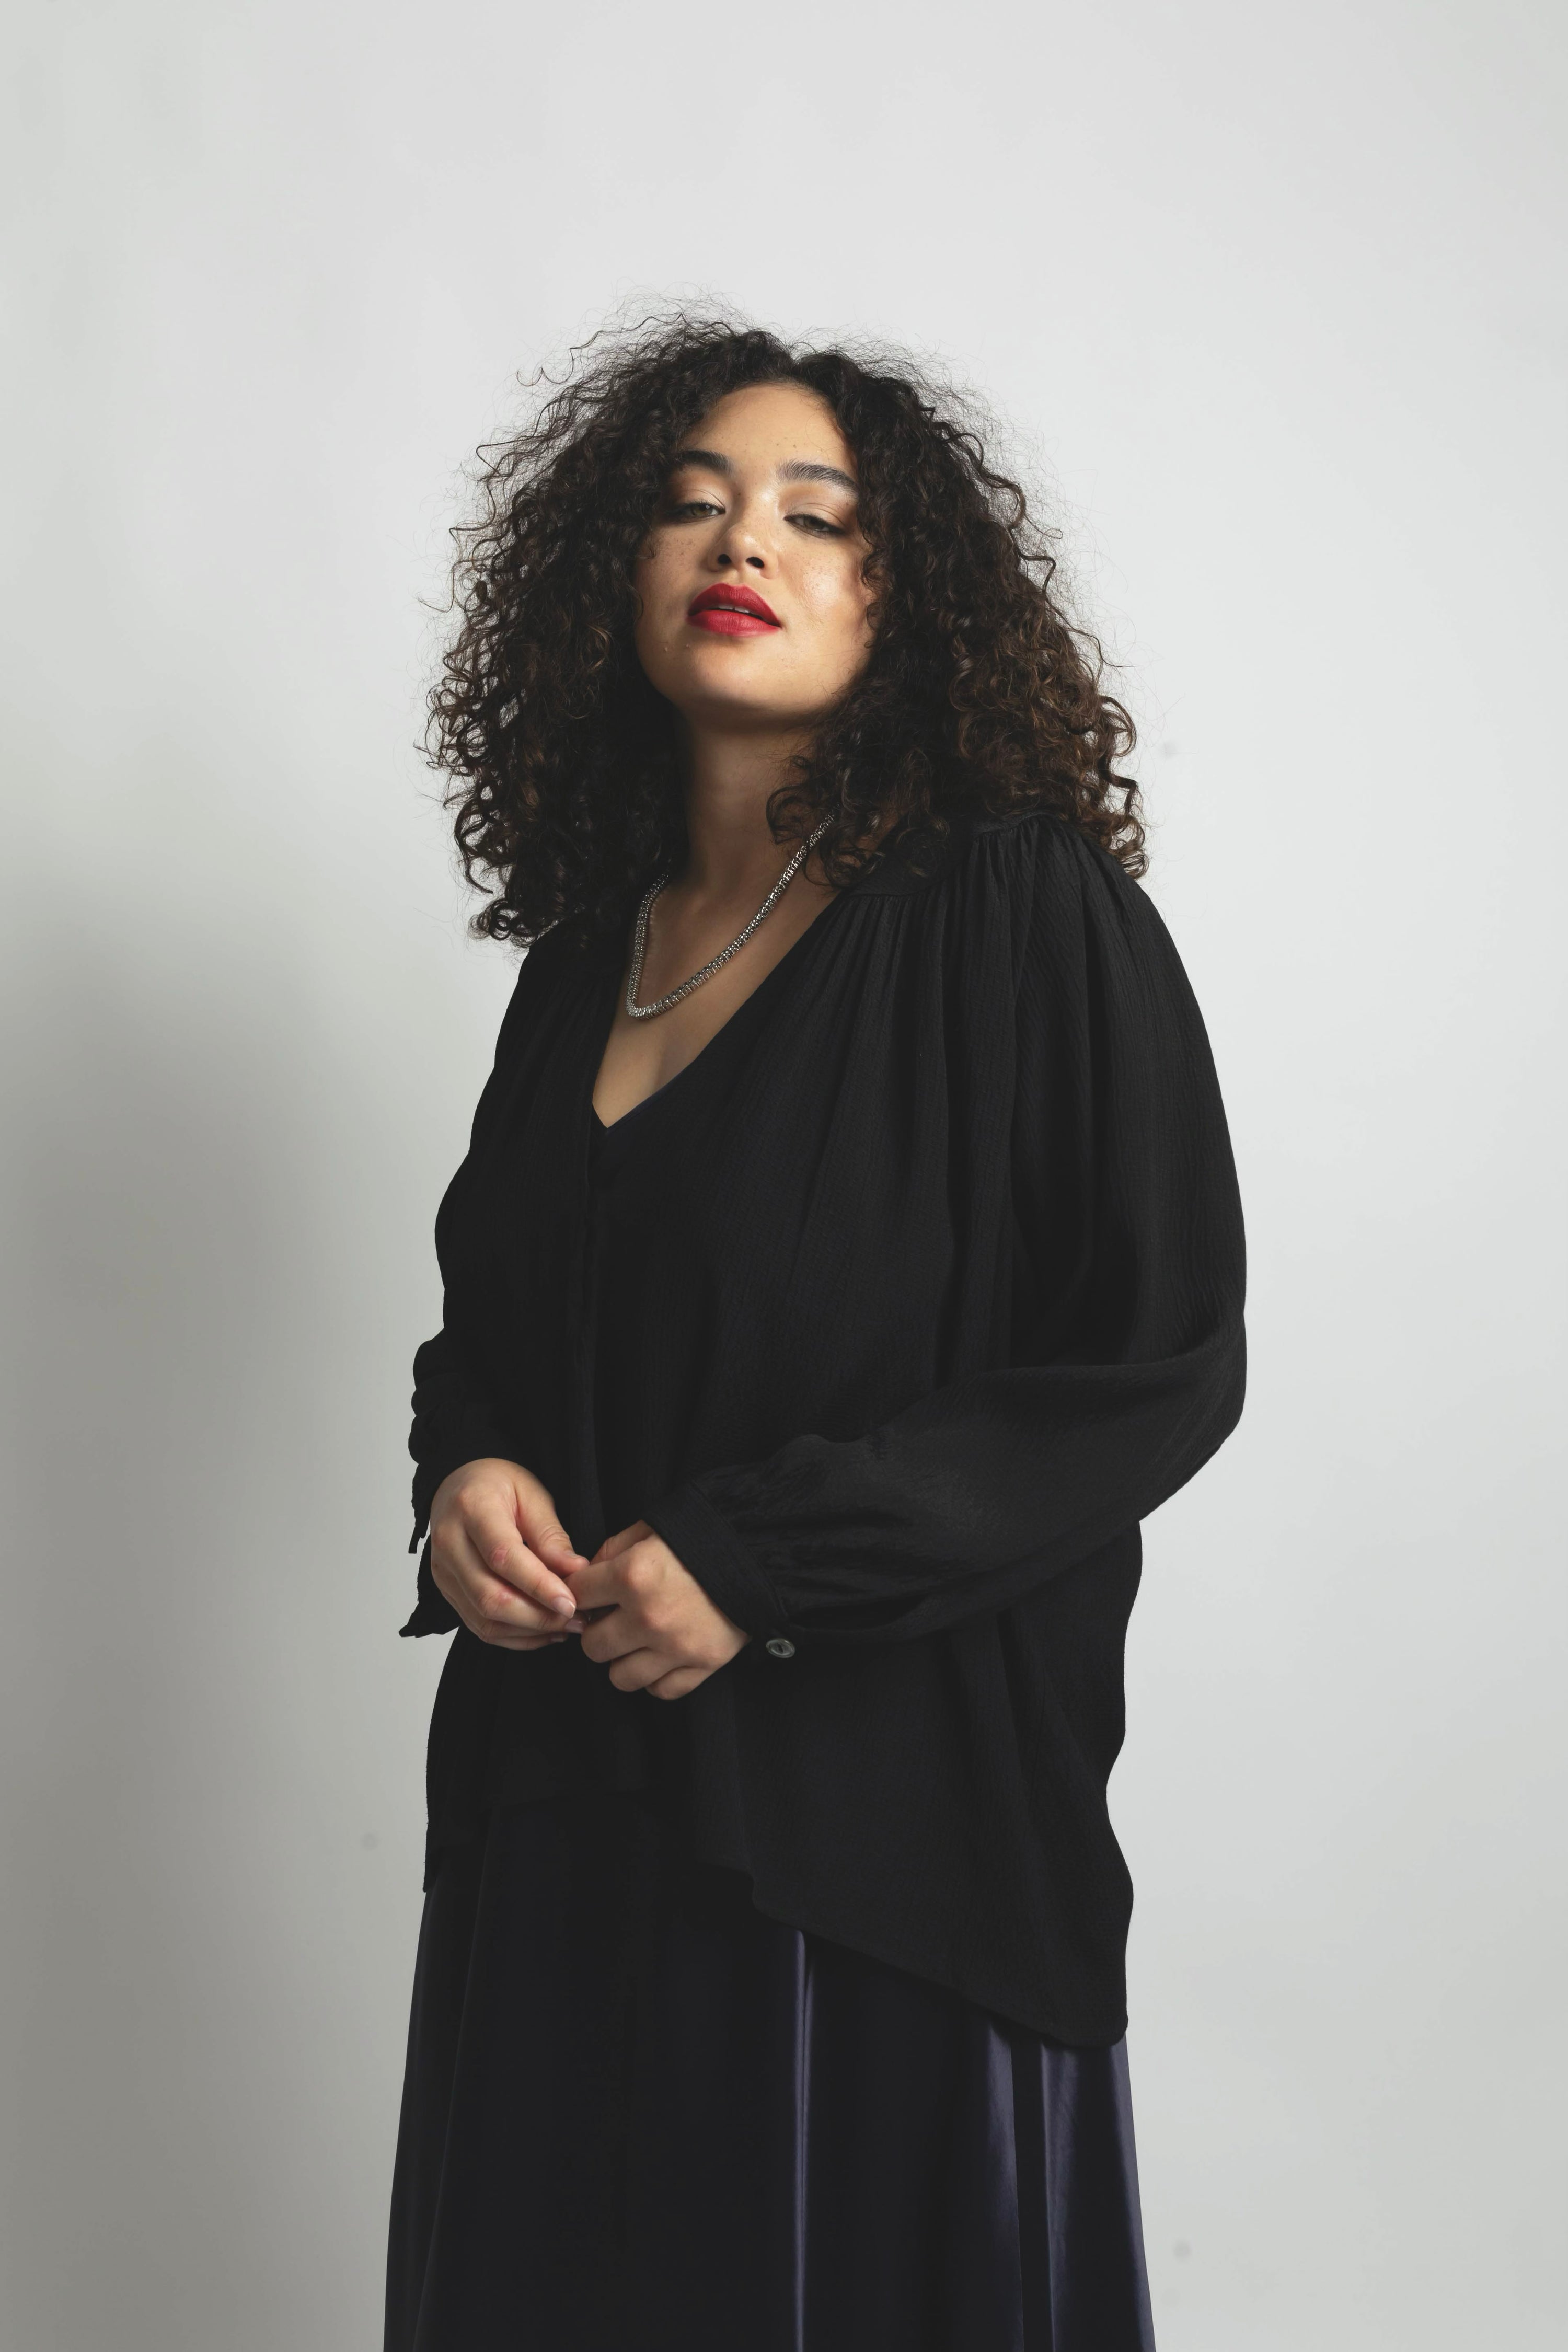 Plus size model wearing textured Stevie top